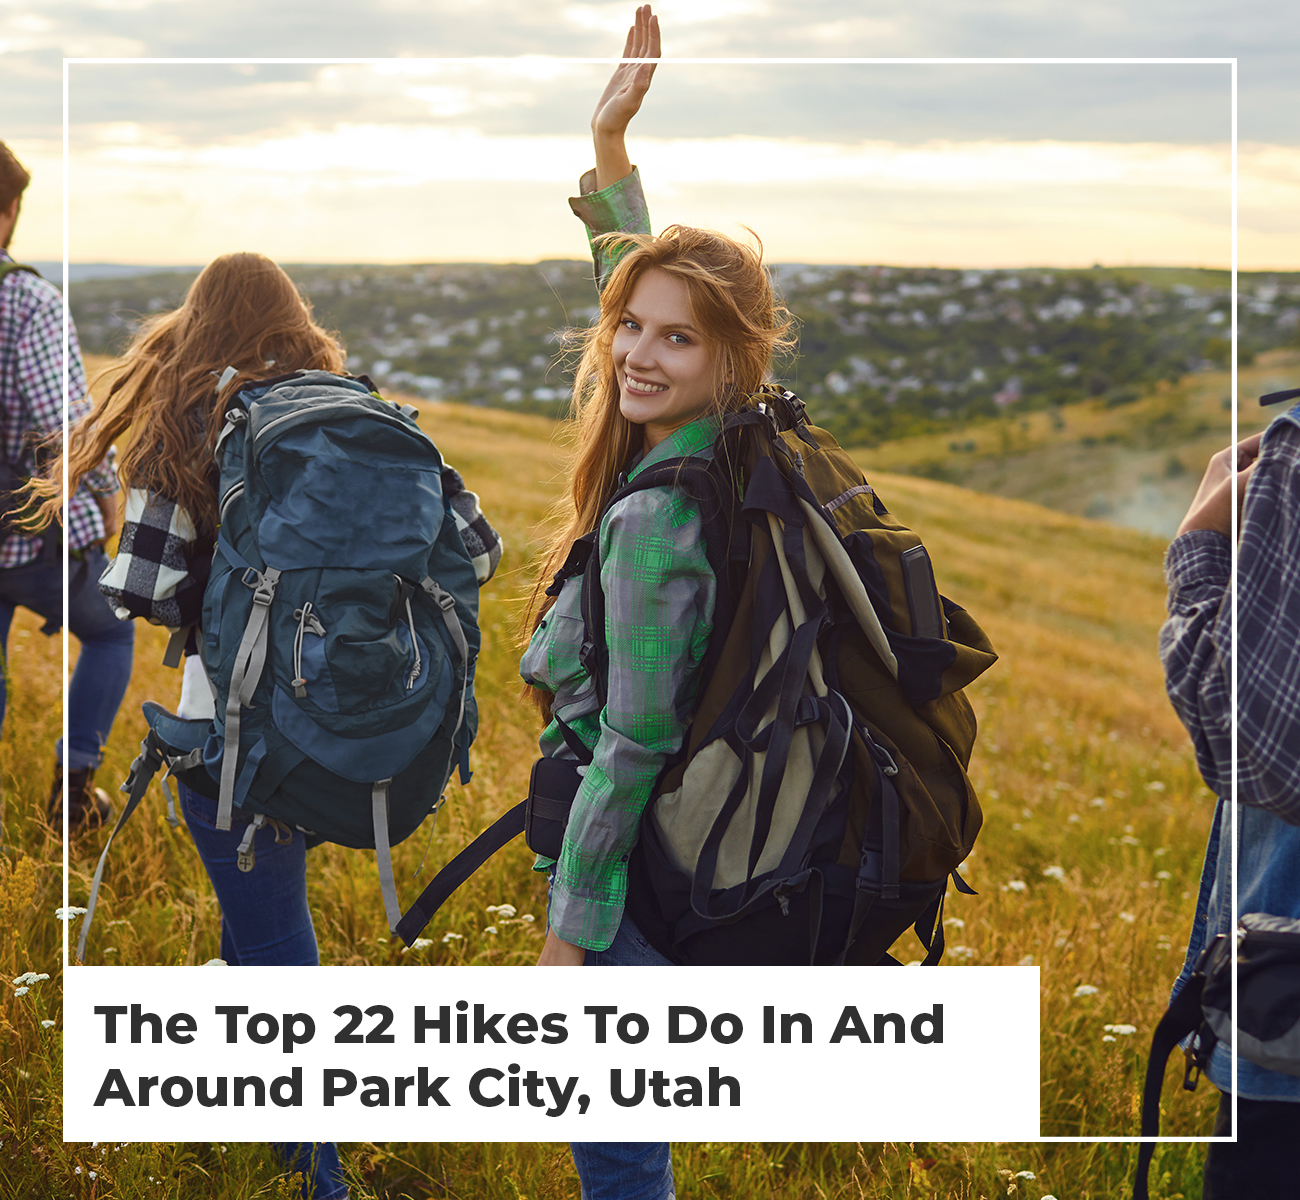 The Top 22 Hikes To Do In And Around Park City, Utah - Main Image